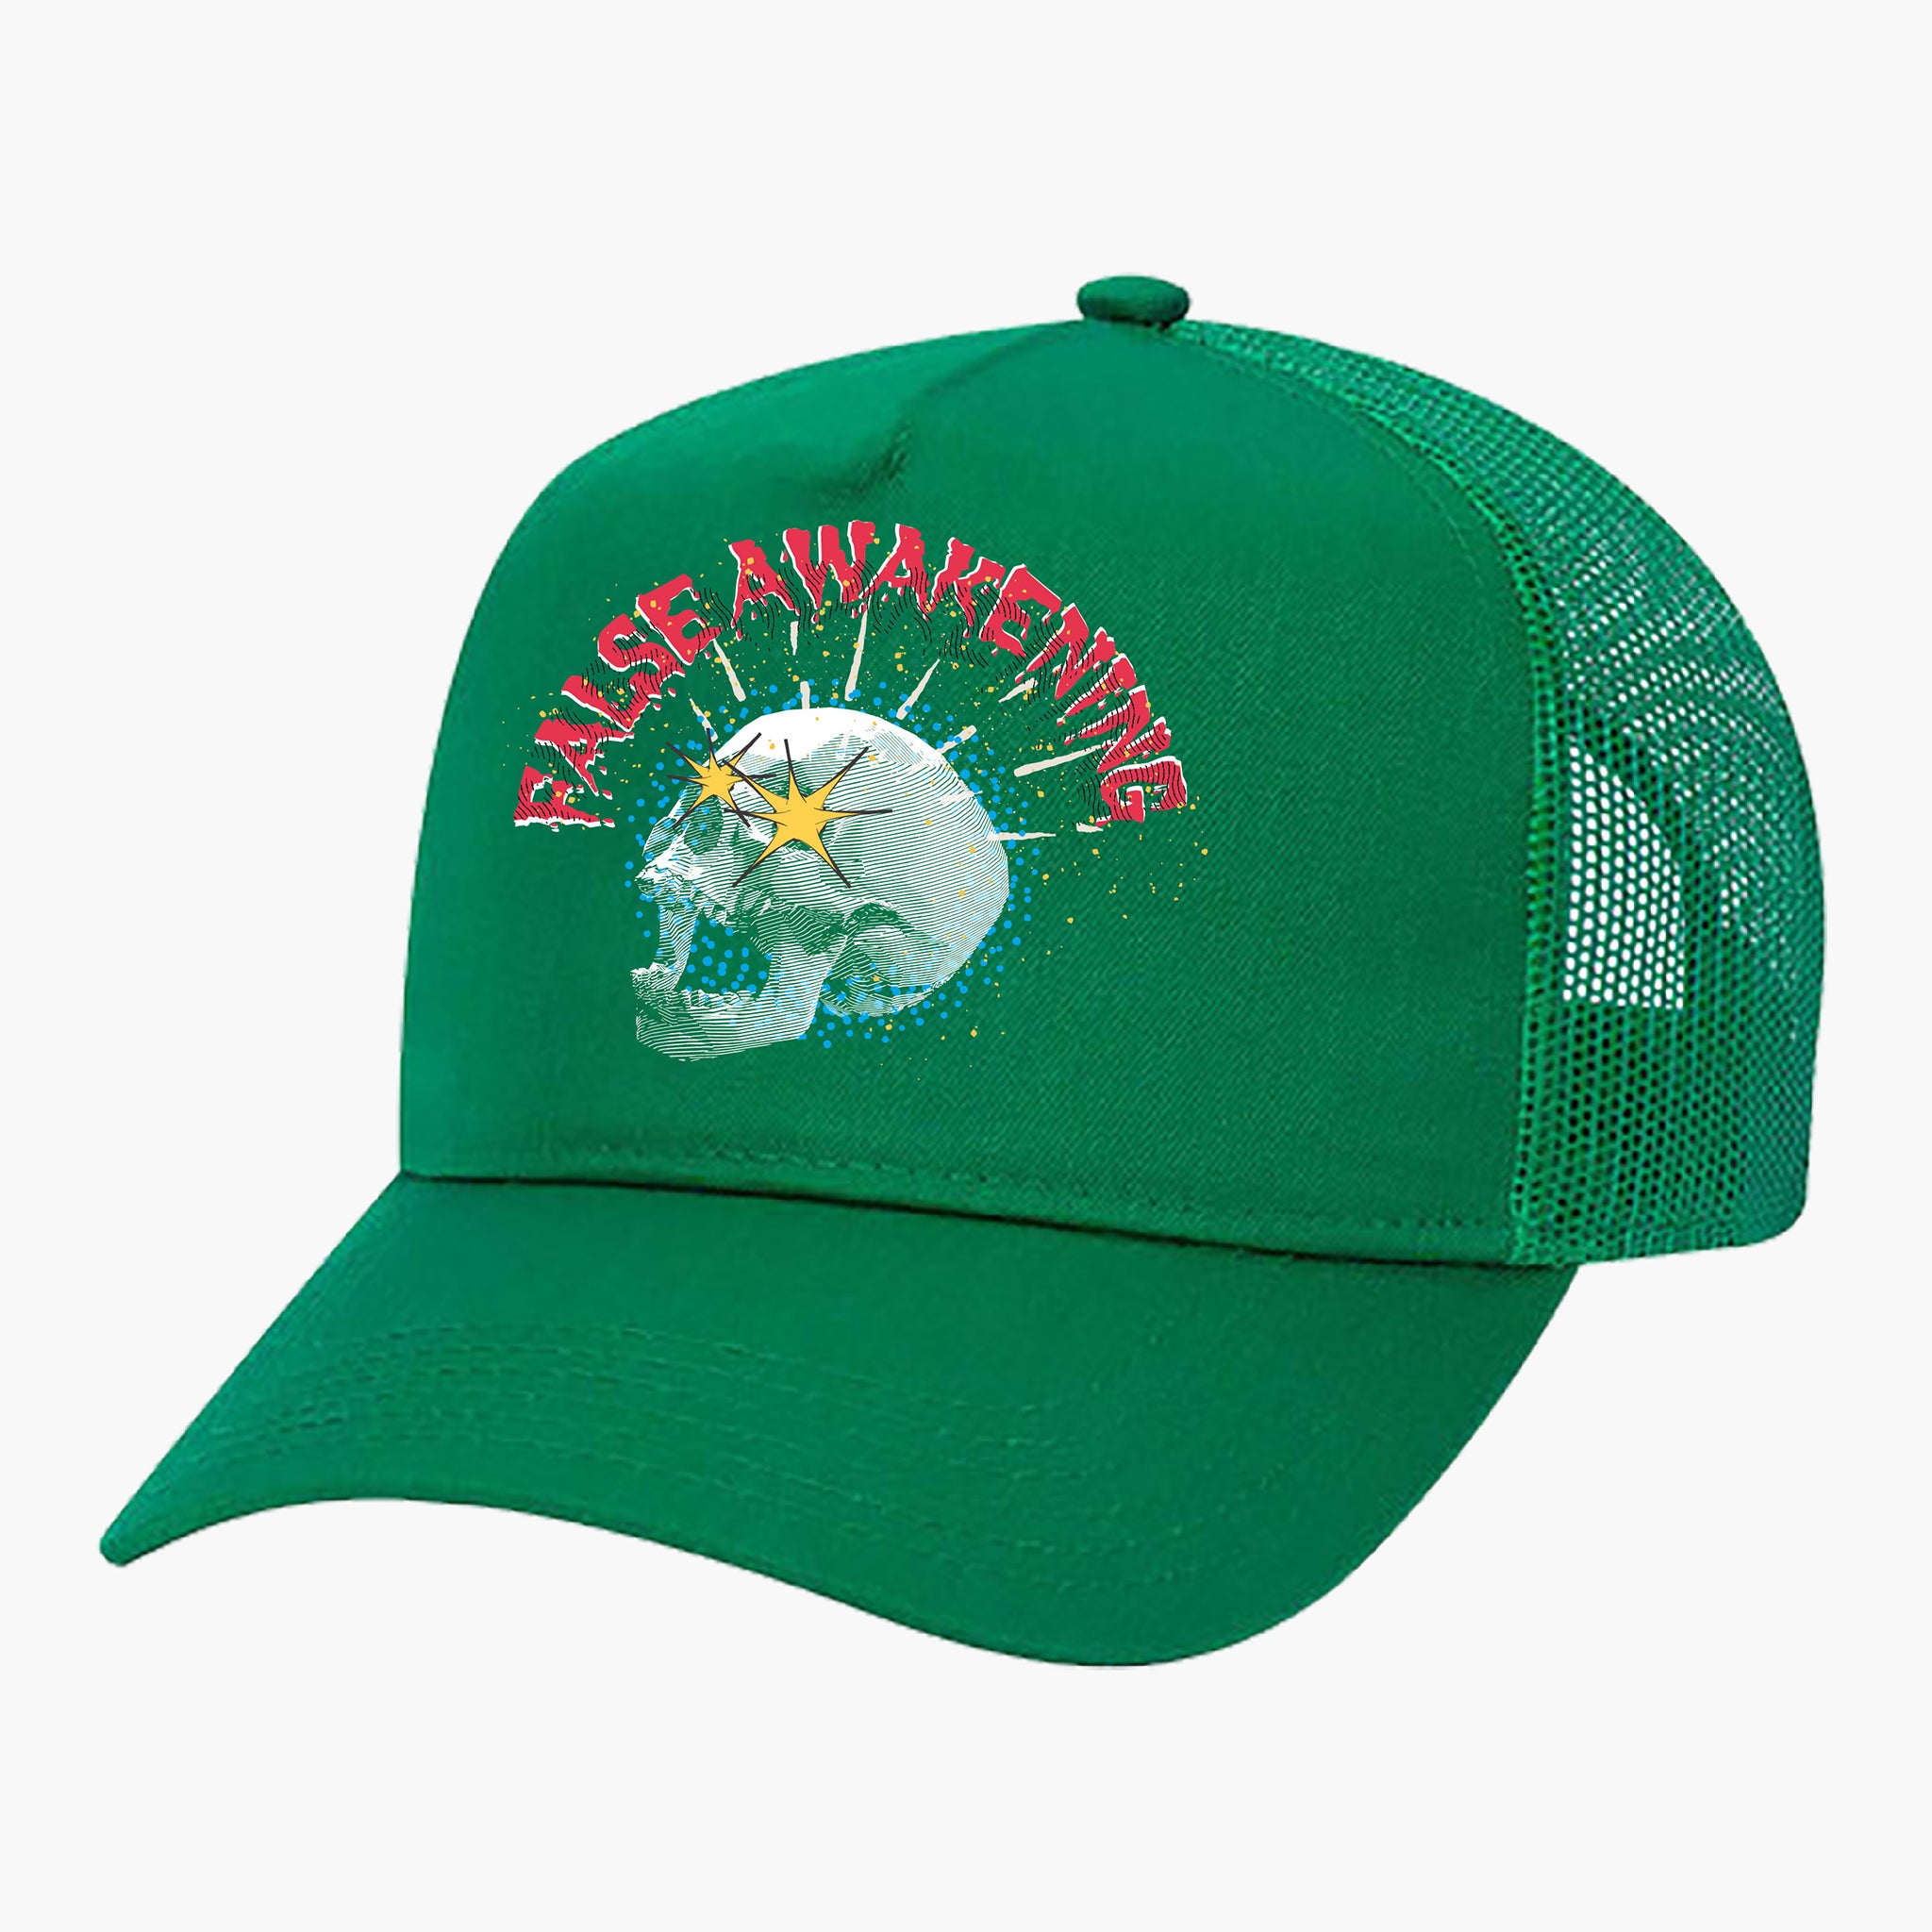 False Awakening Trucker Hat - Frequently Asked Questions